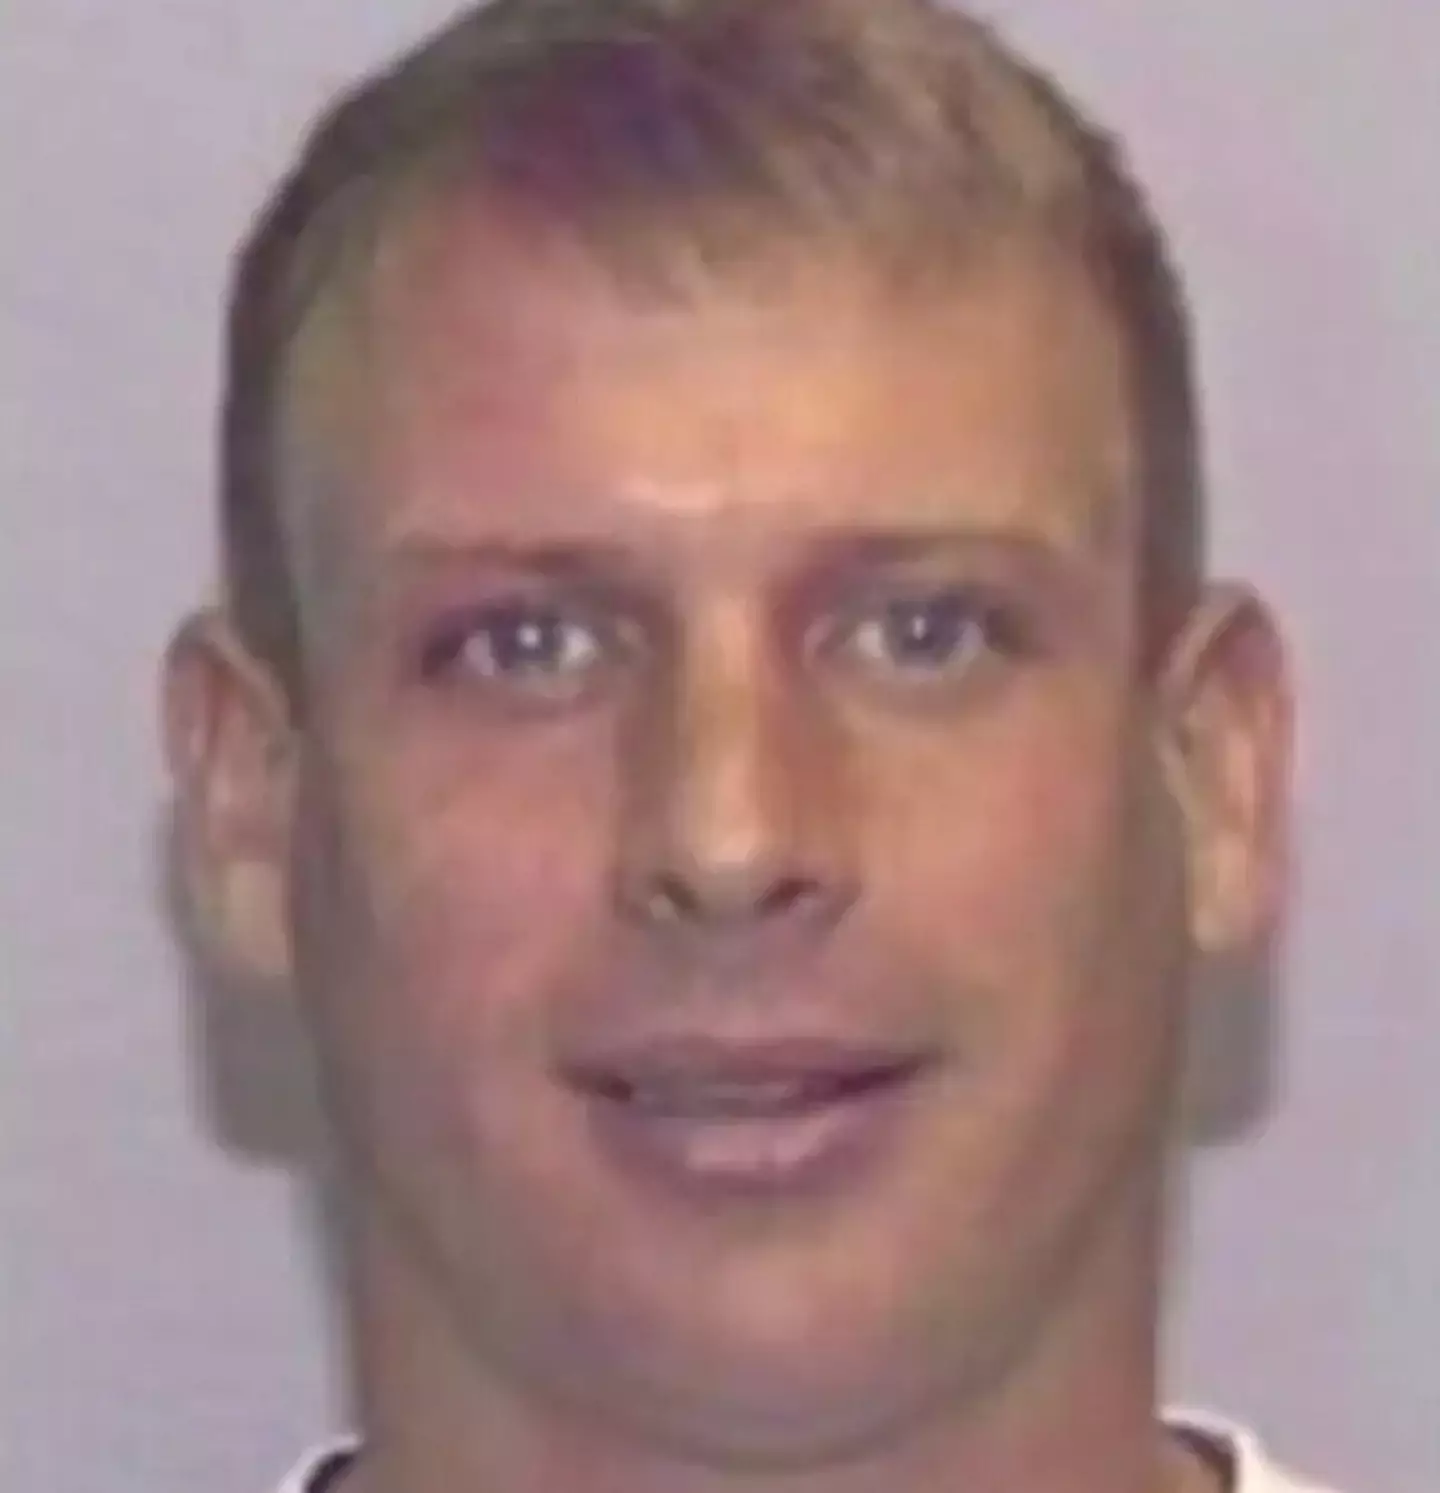 The license plated of the Mitsubishi car belonged to Robert Helphrey, who was last seen in 2006.